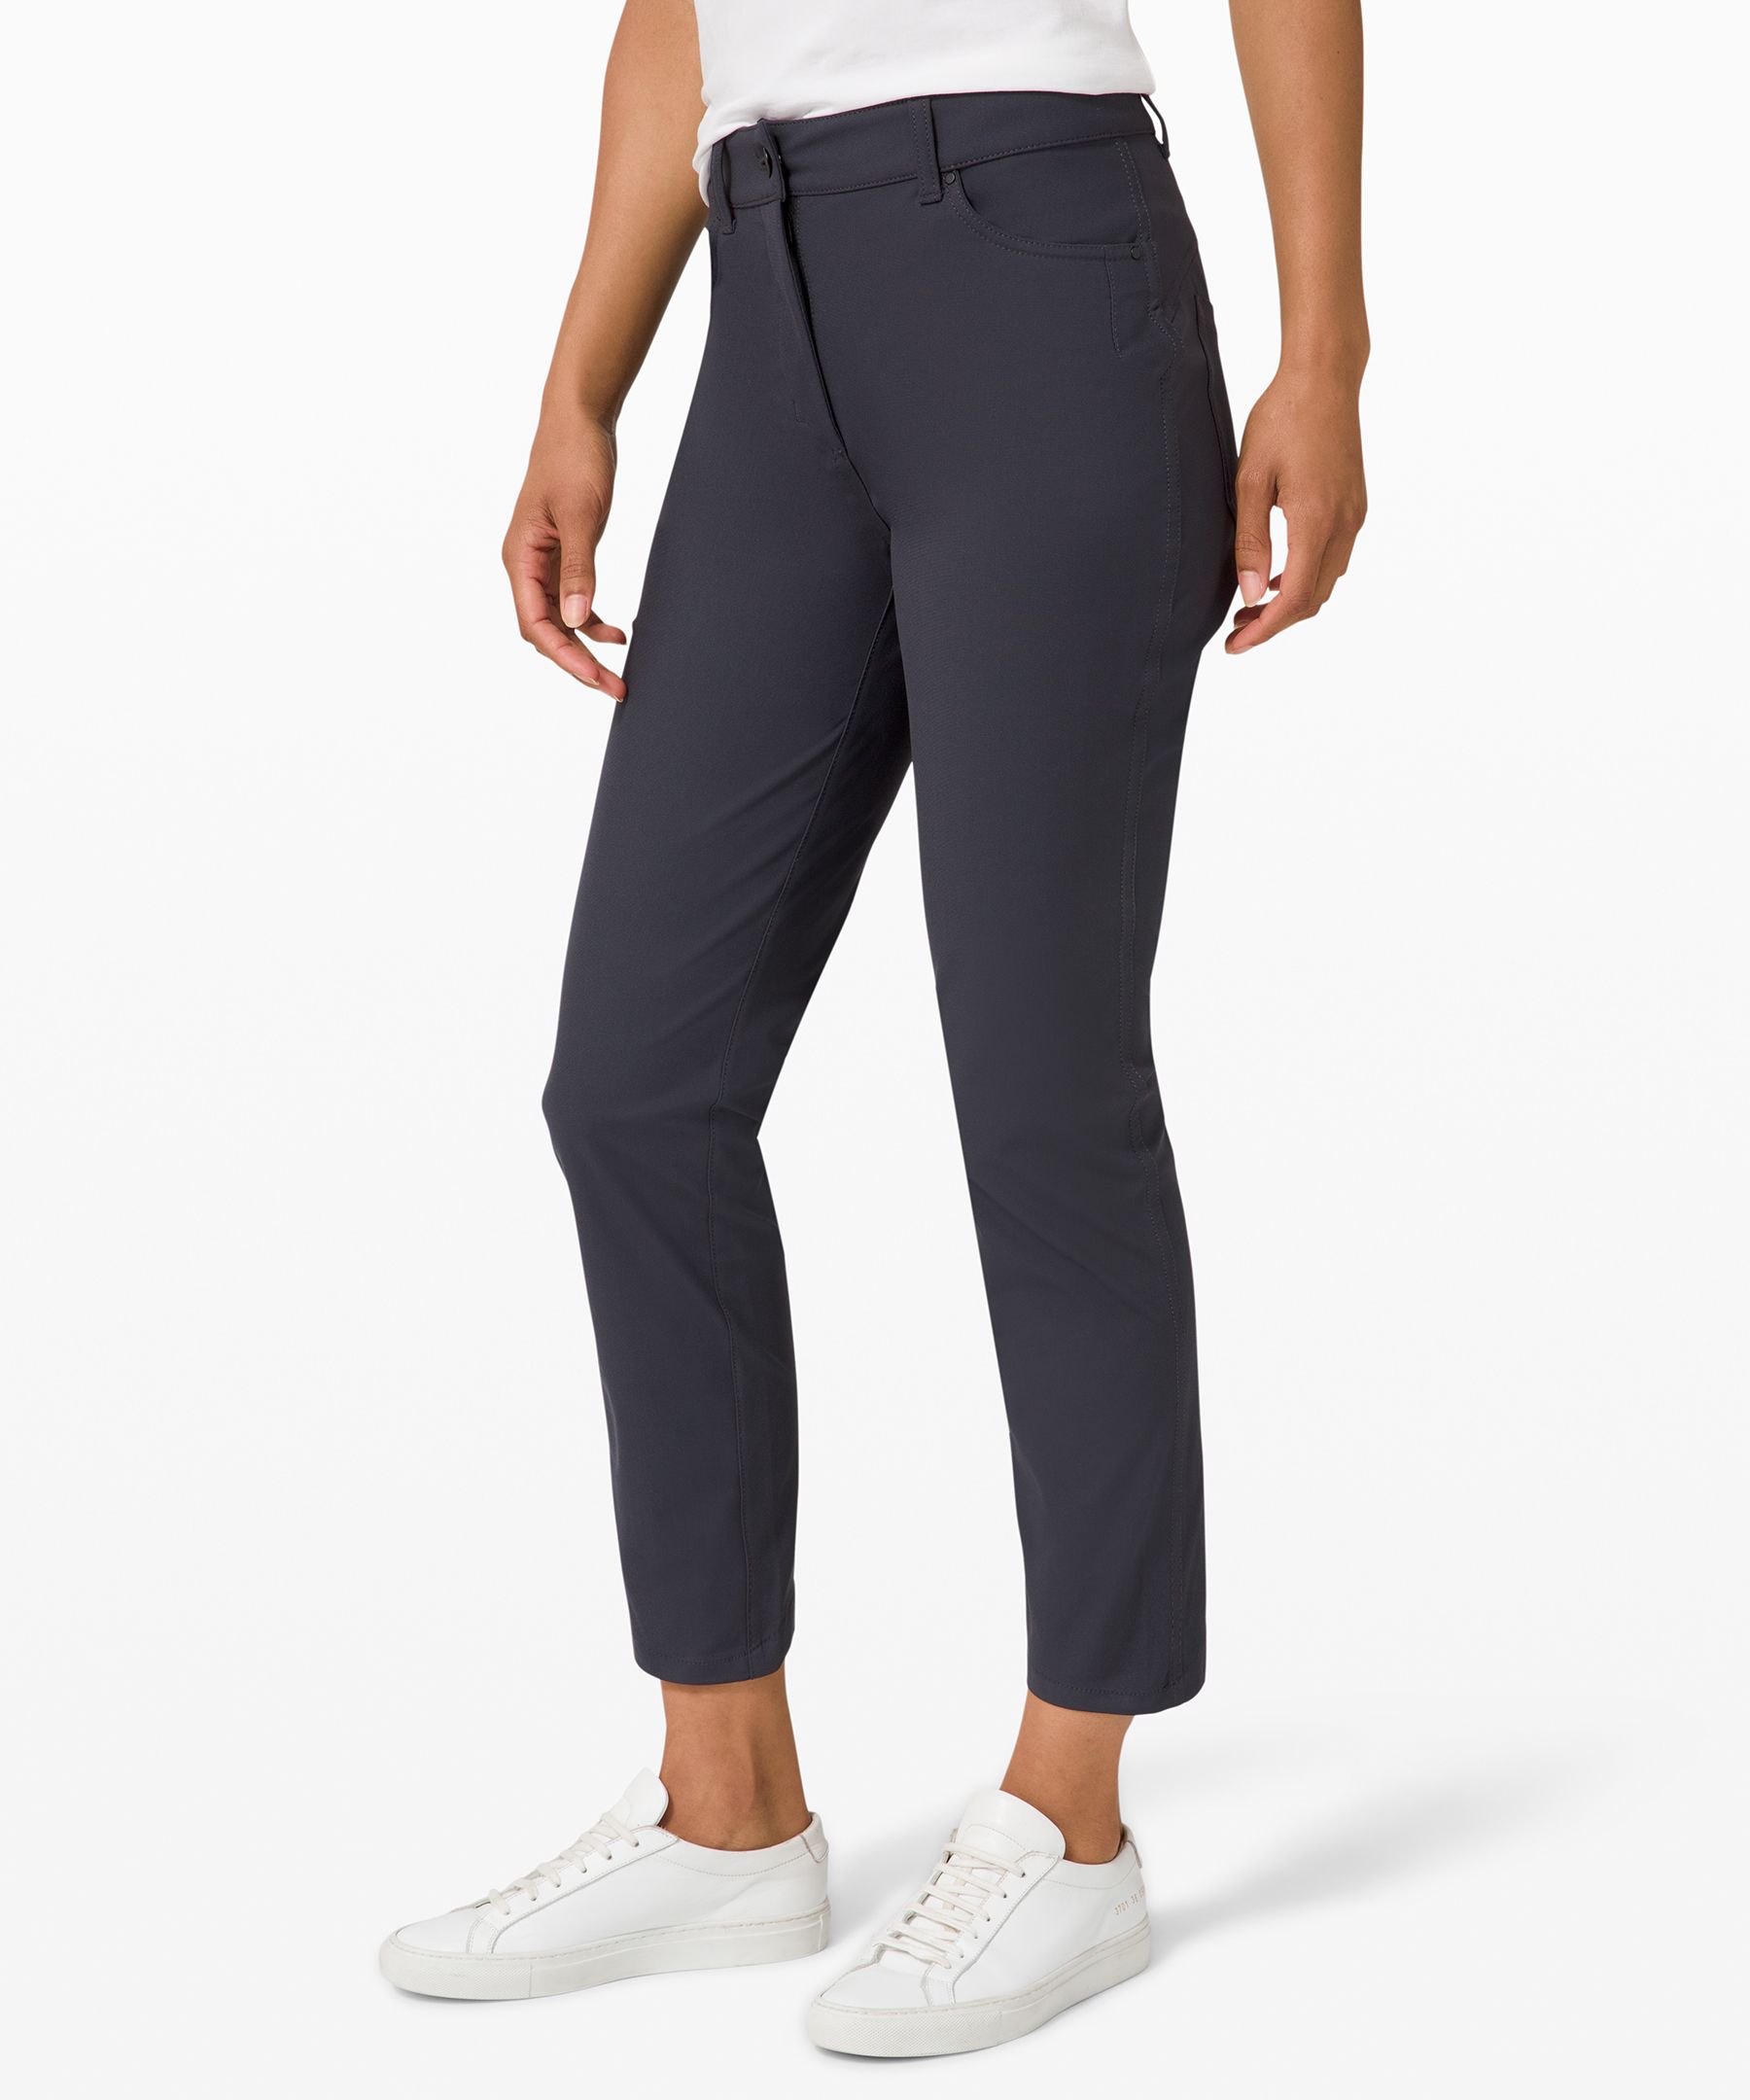 Lululemon City Sleek Pant Reviewed  International Society of Precision  Agriculture